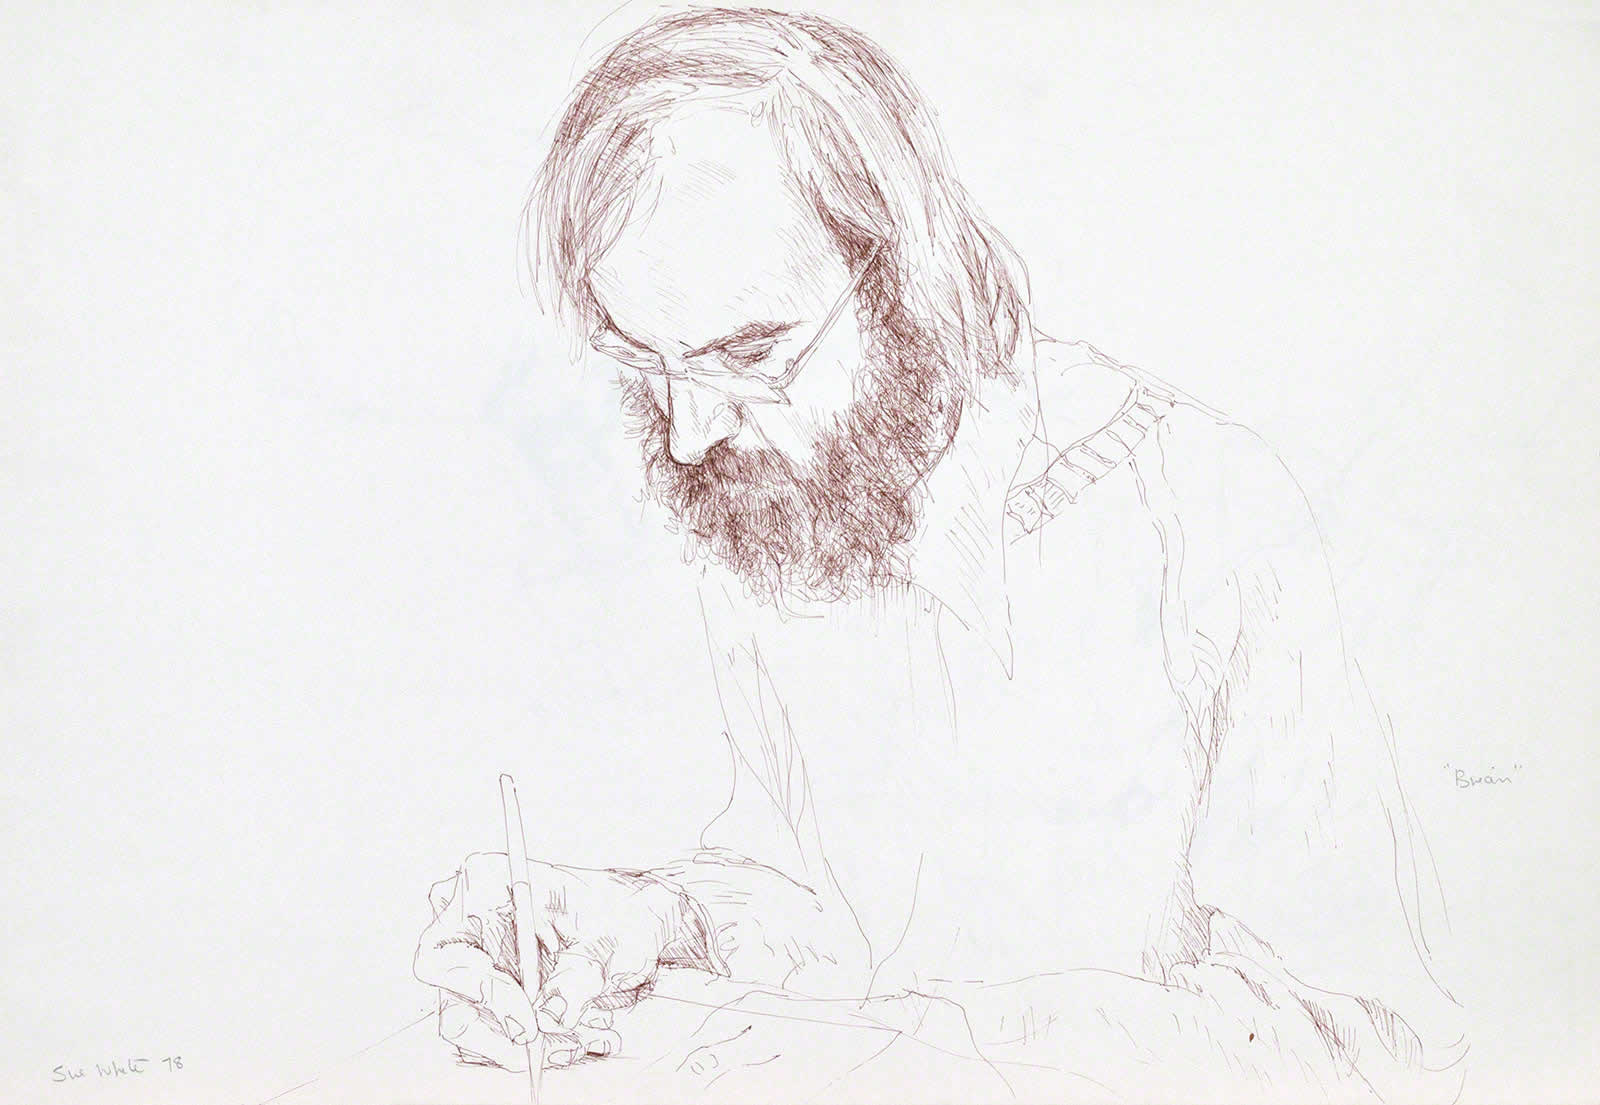 Brian Writing - study for portrait 'Dr Brian Freeman' by Susan Dorothea White